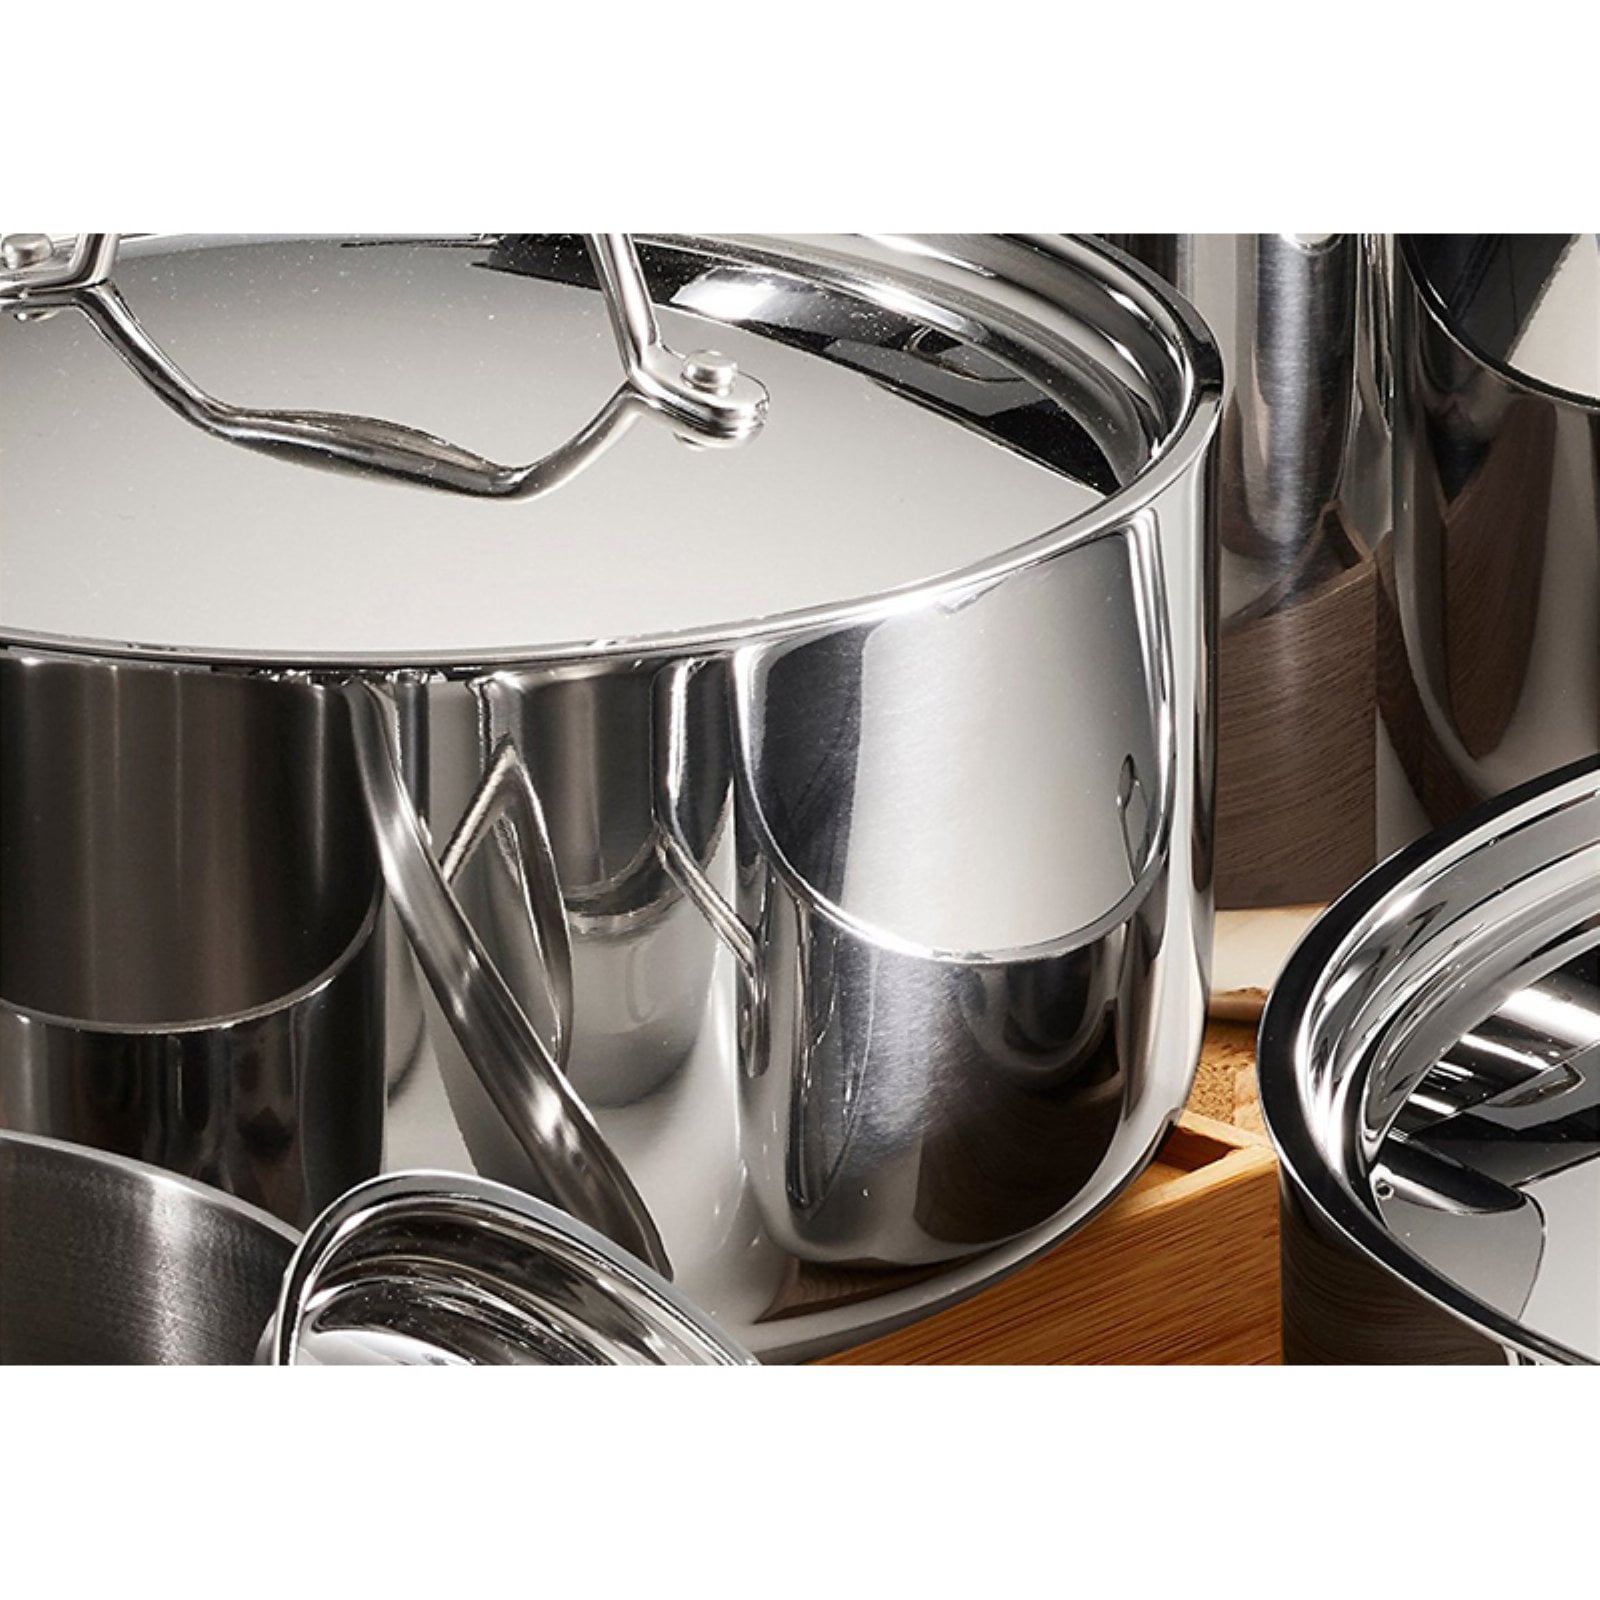 Tramontina 12-piece Tri-Ply Clad Stainless Steel Cookware Set Gourmet  Collection